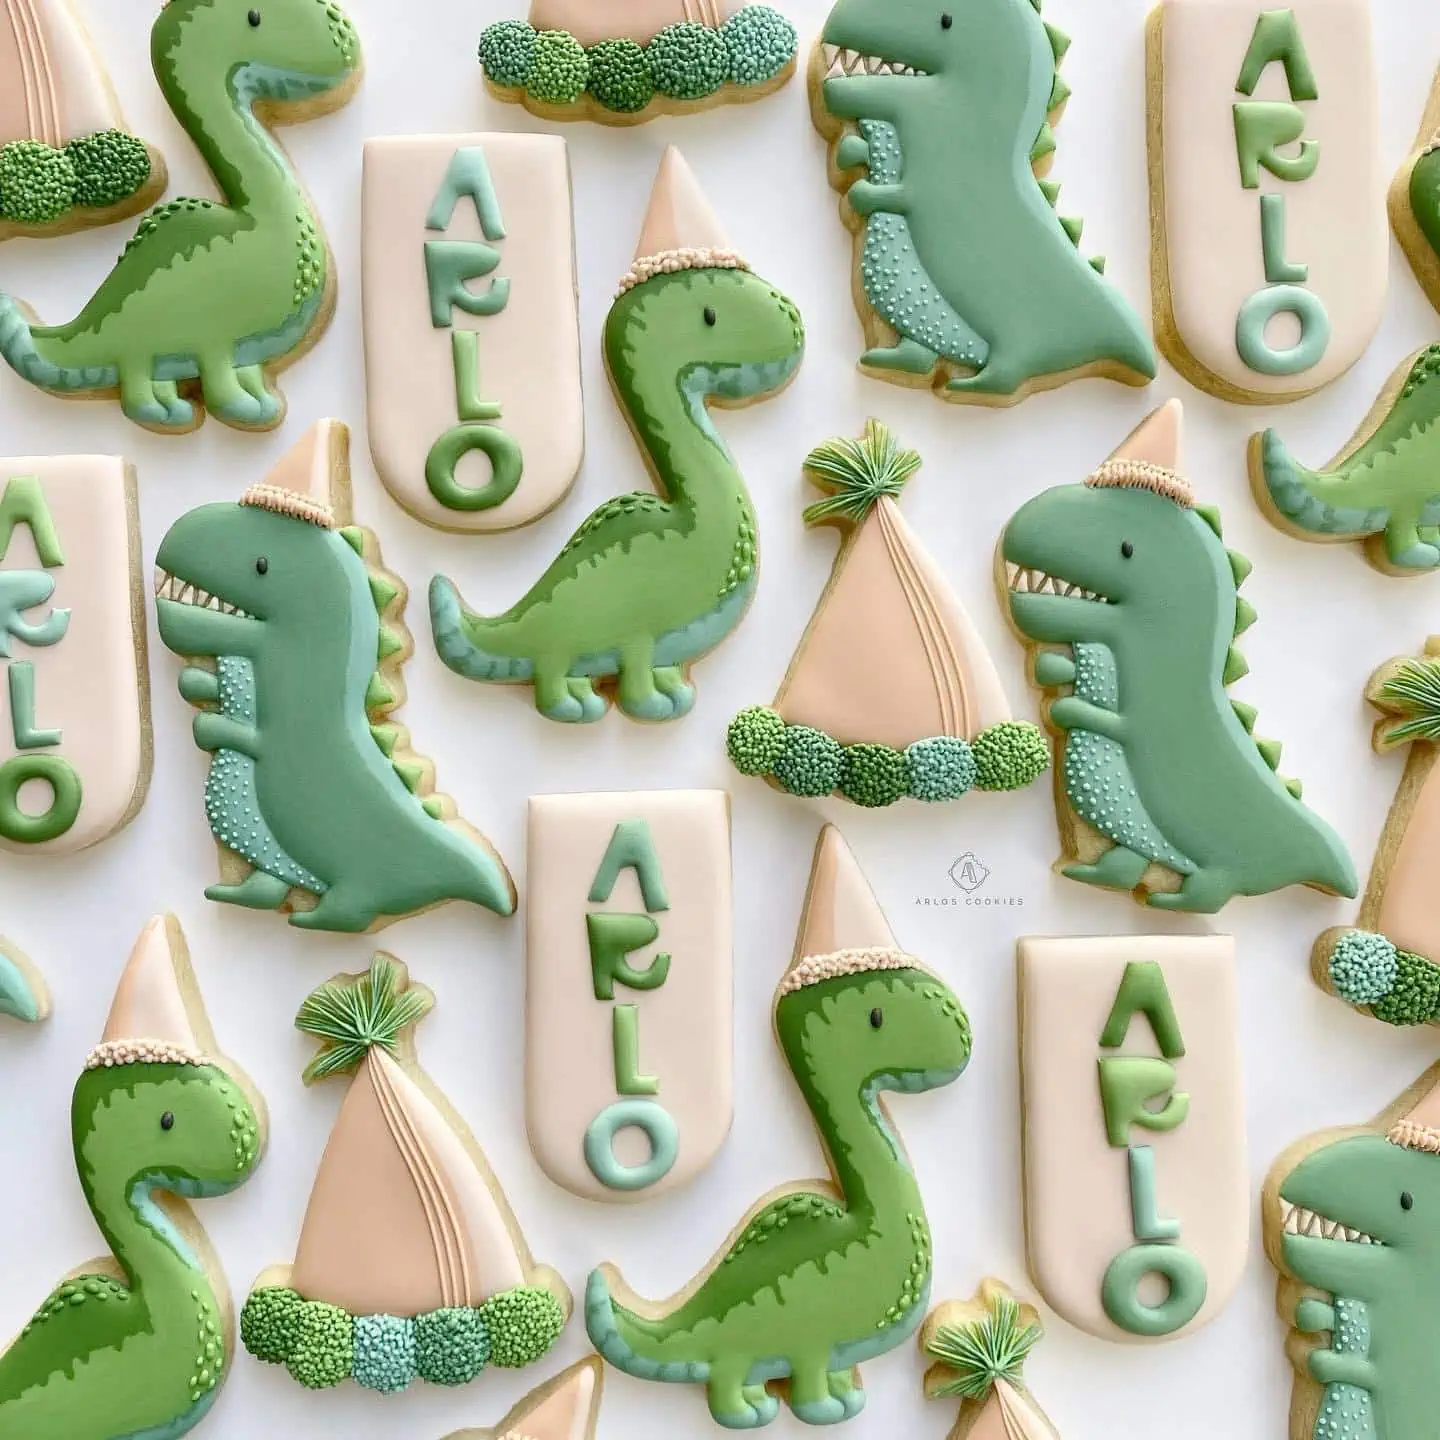 Decorated cookies in the shapes of dinosaurs, party hats, and pendants with the name "Arlo" arranged in a flat lay.